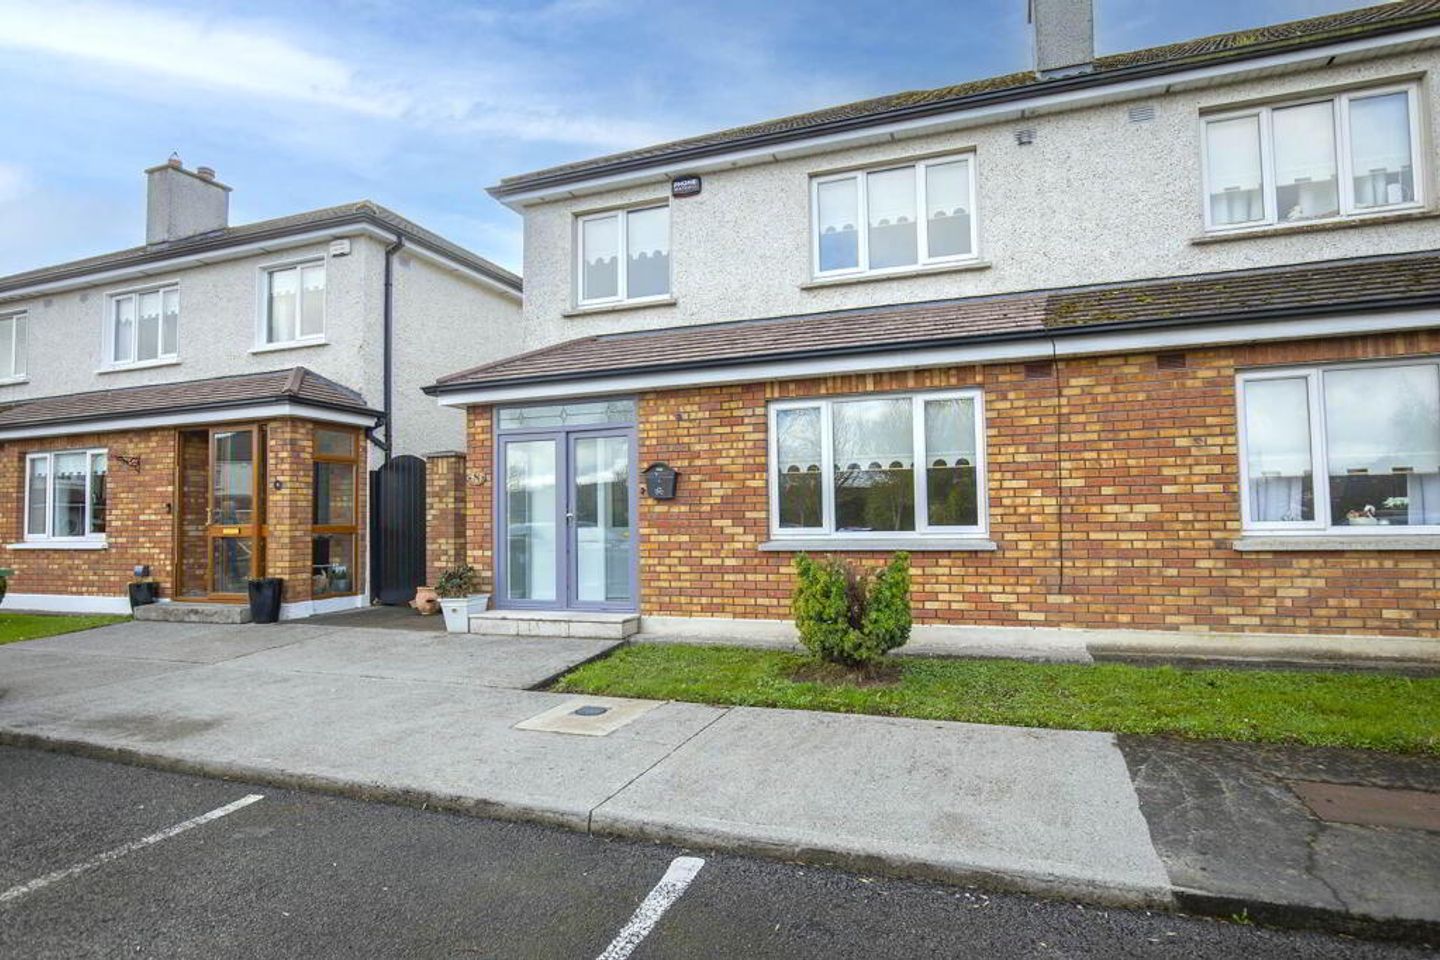 8 Cairn Court, Ratoath, Co. Meath, A85PV08